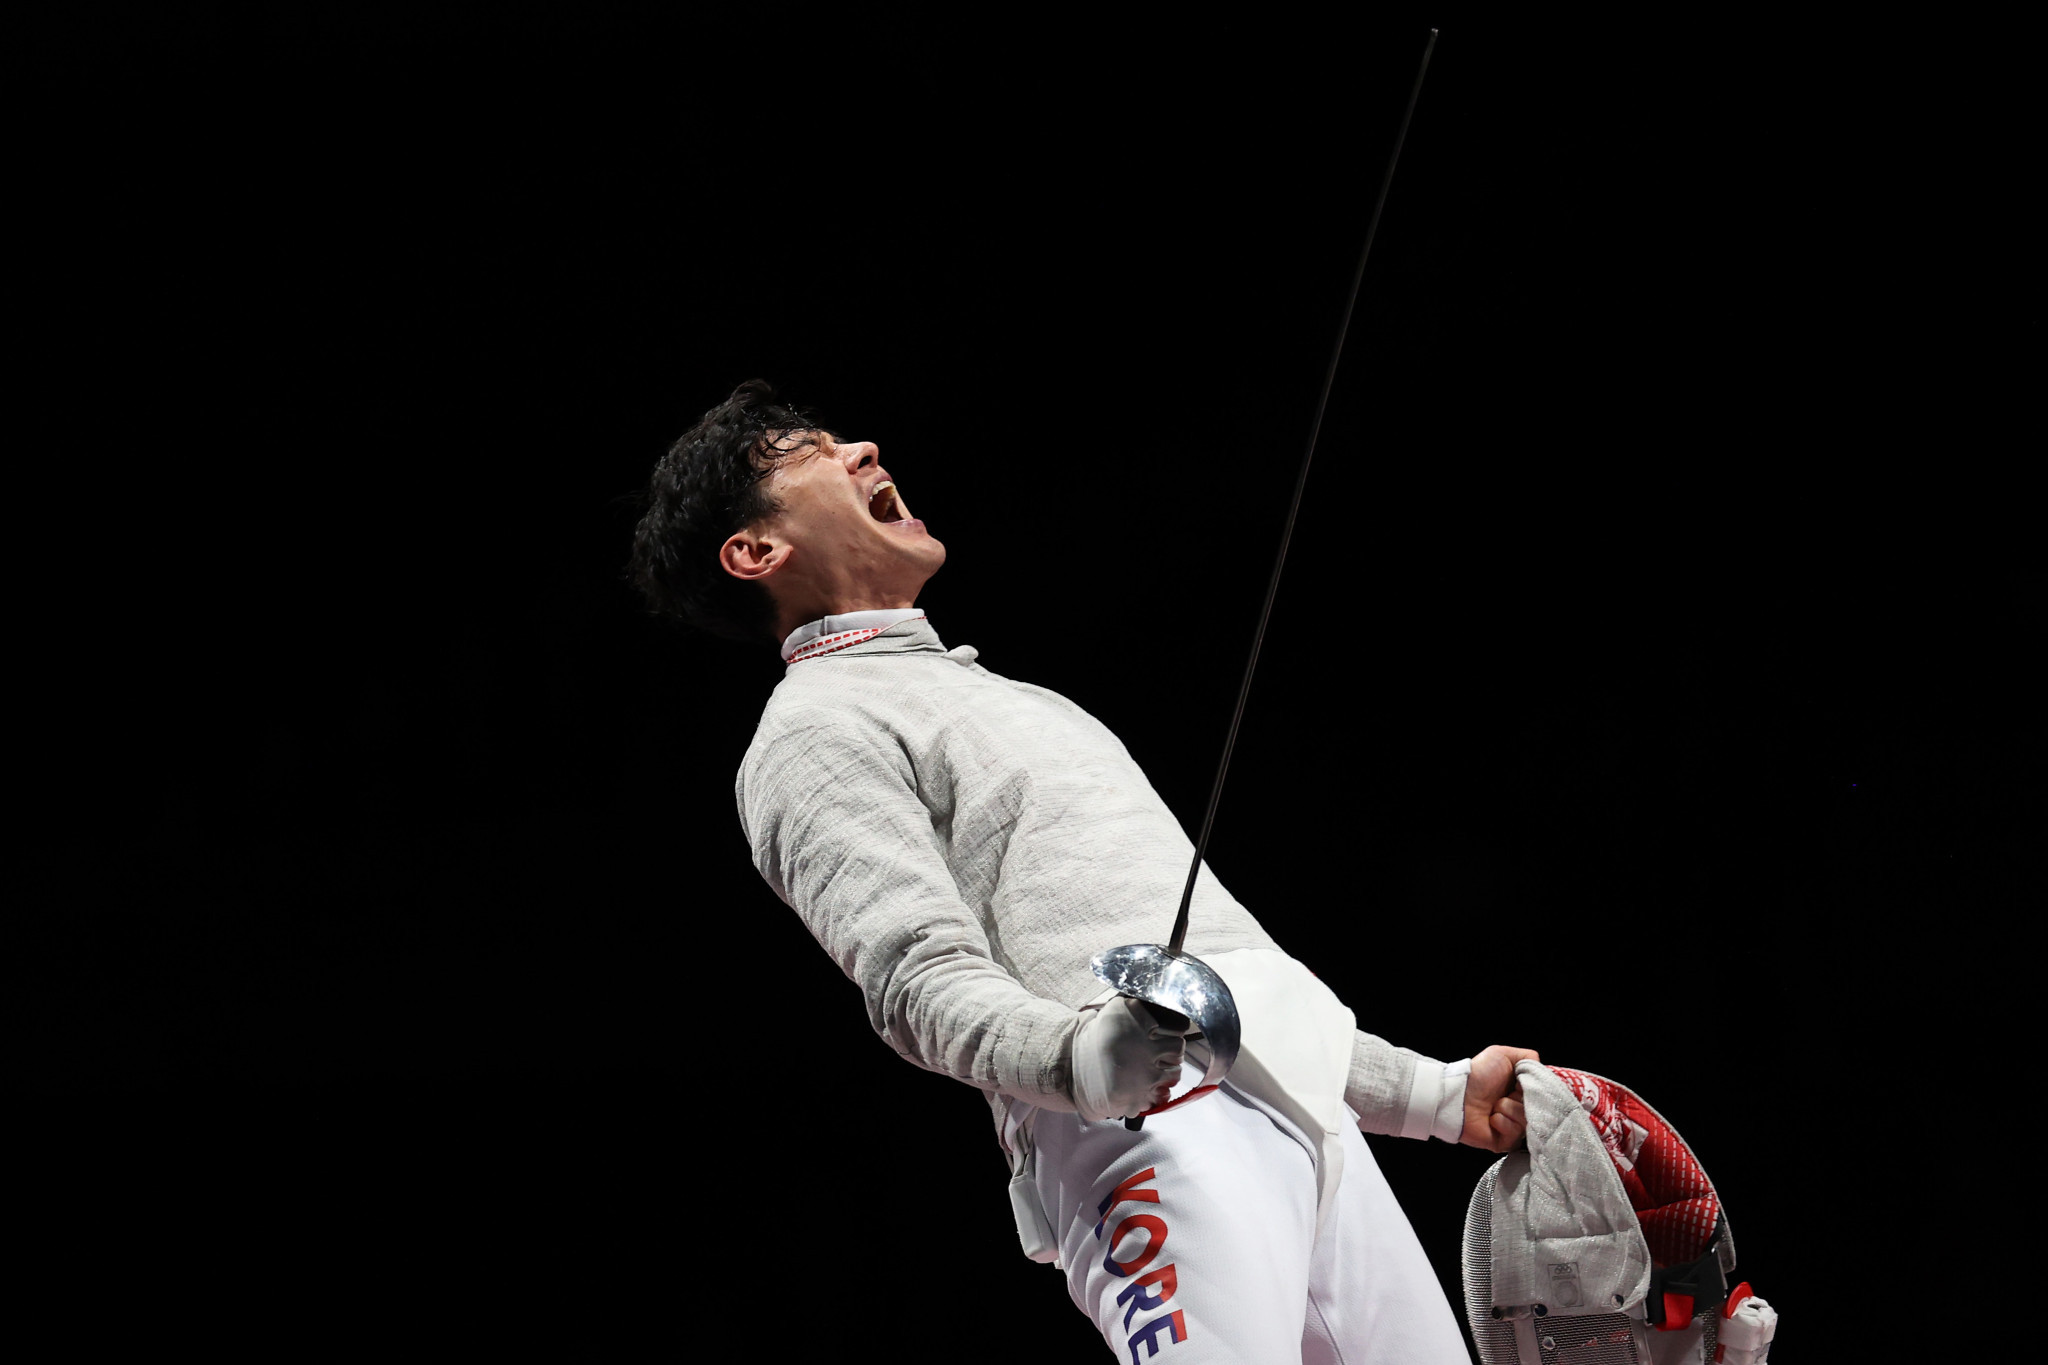 Hong Kong and South Korea claim golds on opening day at Asian Fencing Championships